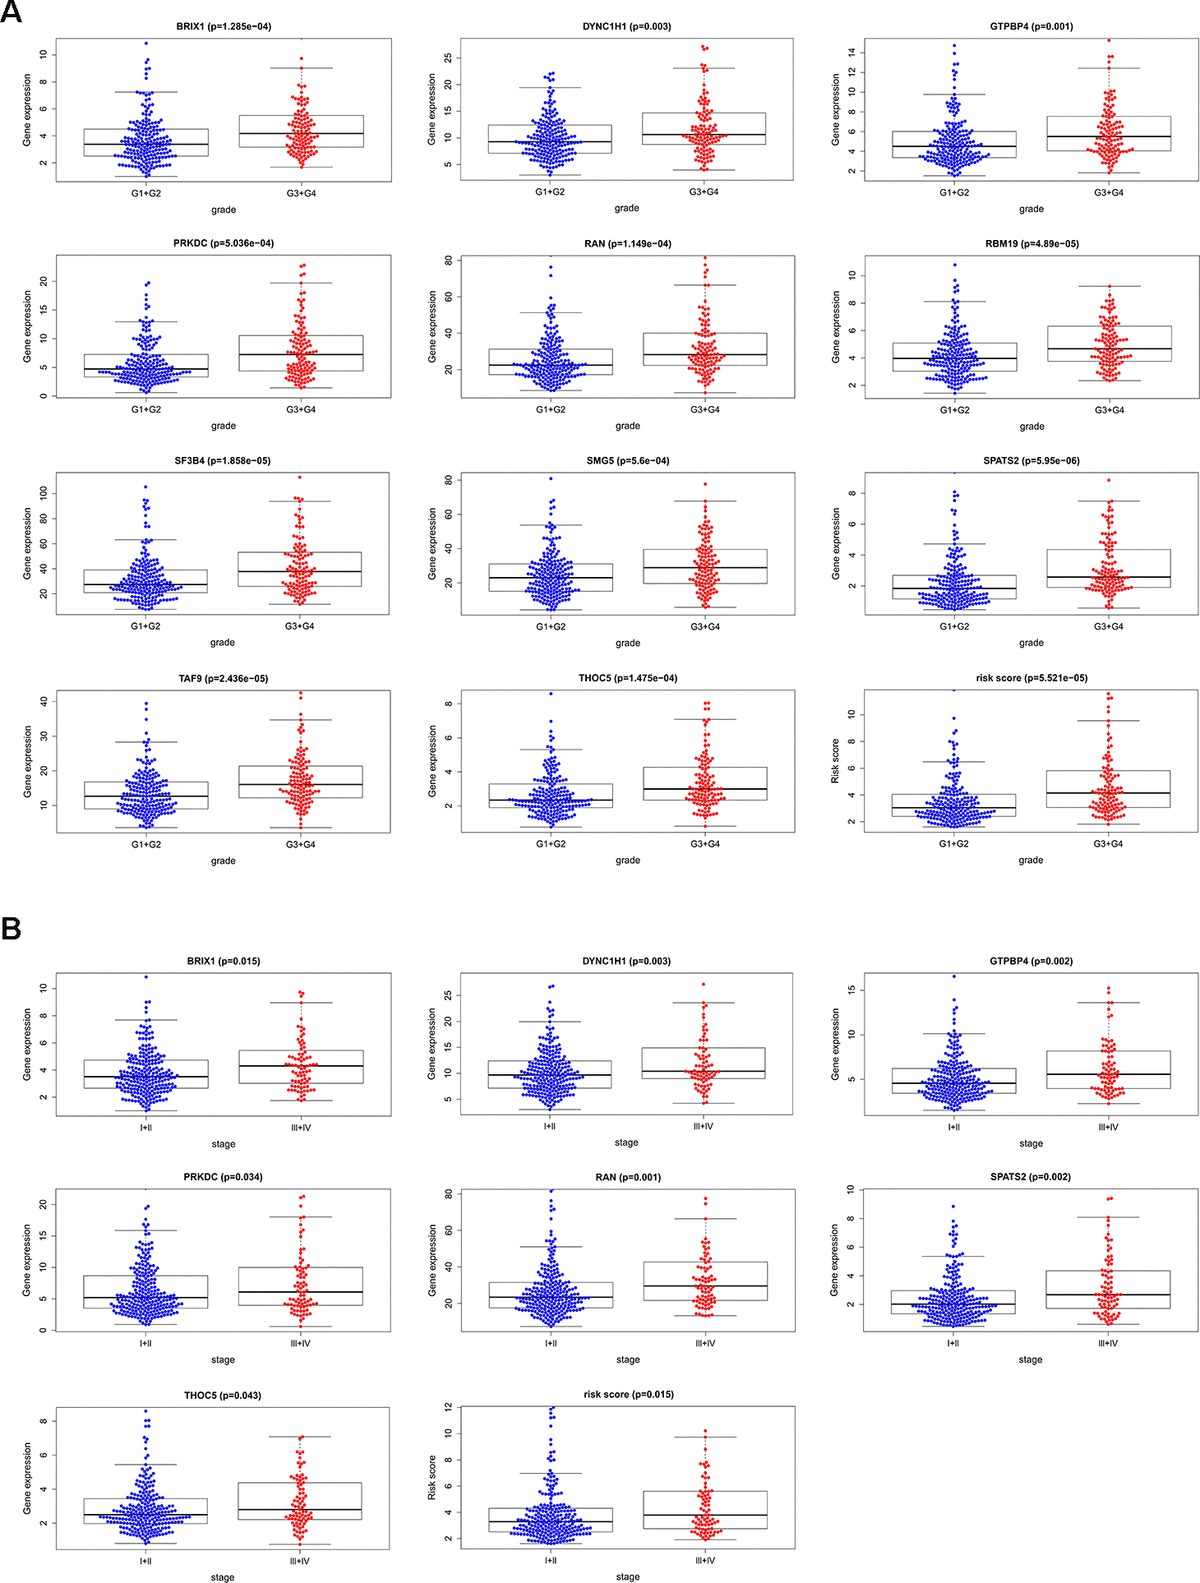 The relevance between 11 prognostic RBPs and clinicopathologic features. (A) The relationship between 11 prognostic RBPs and tumor grade. (B) The relationship between 11 prognostic RBPs and TNM stage.